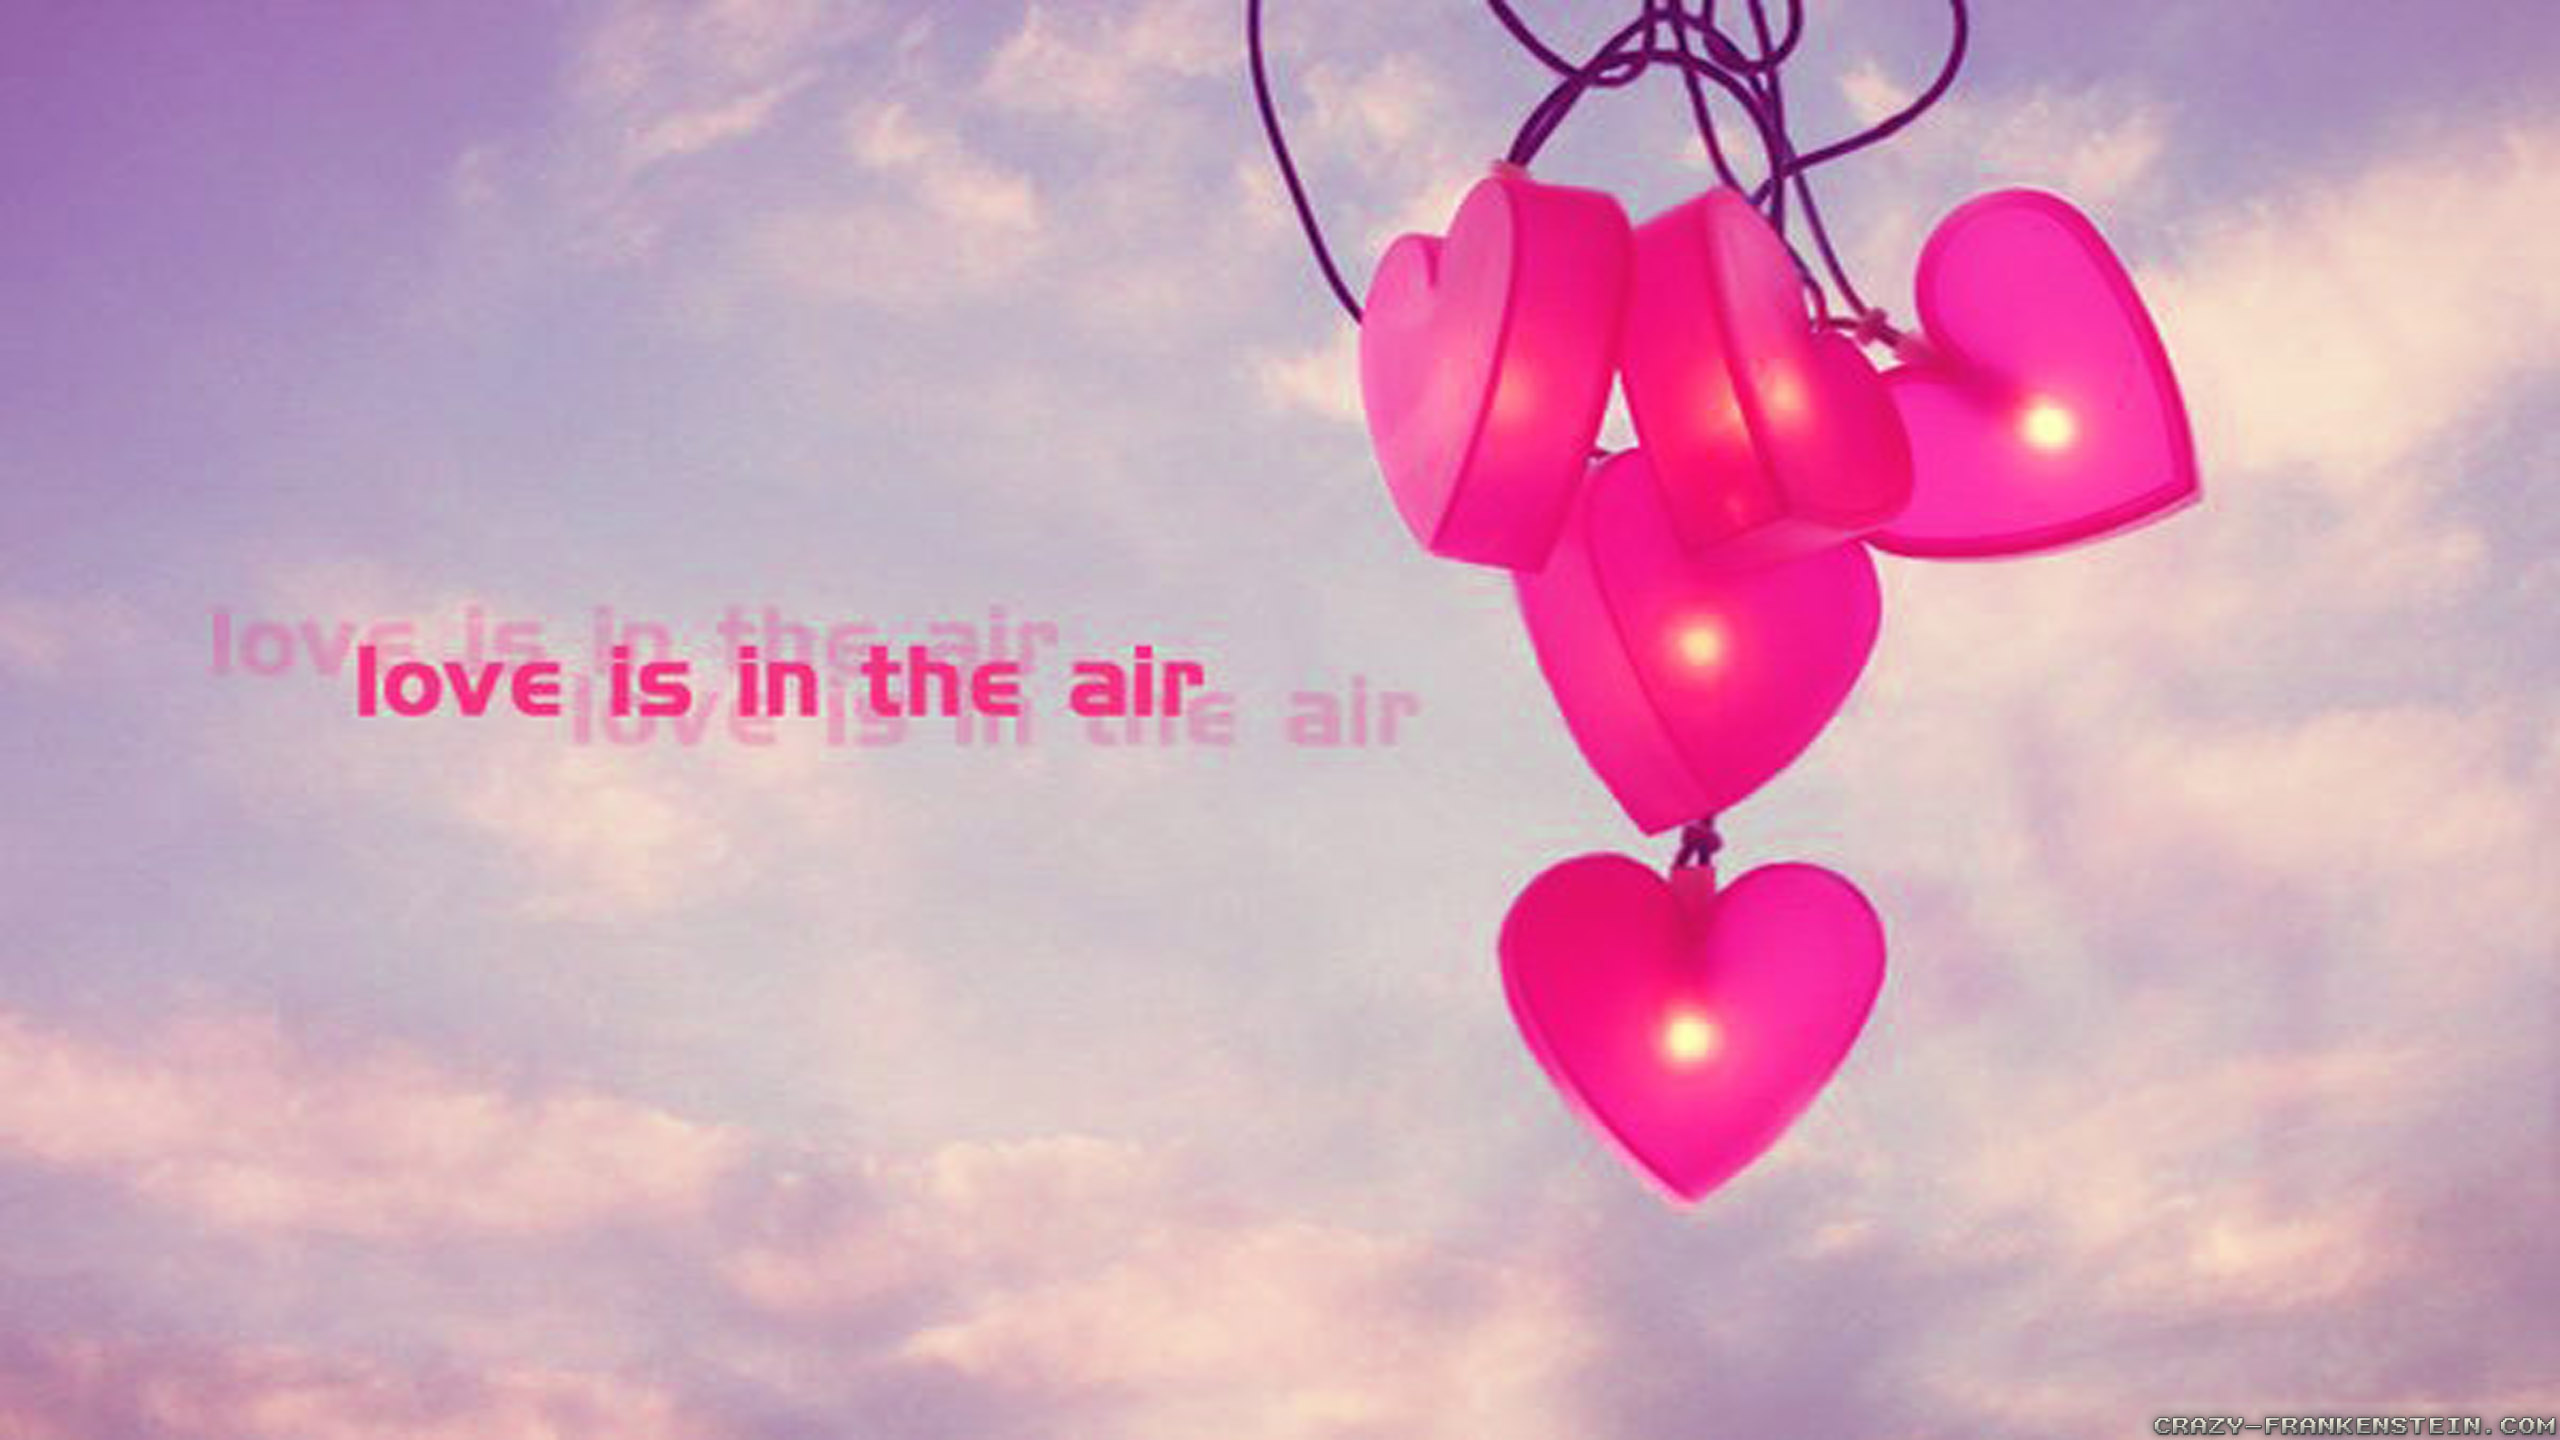 2560x1440px Love Is In The Air 305.22 KB #278588